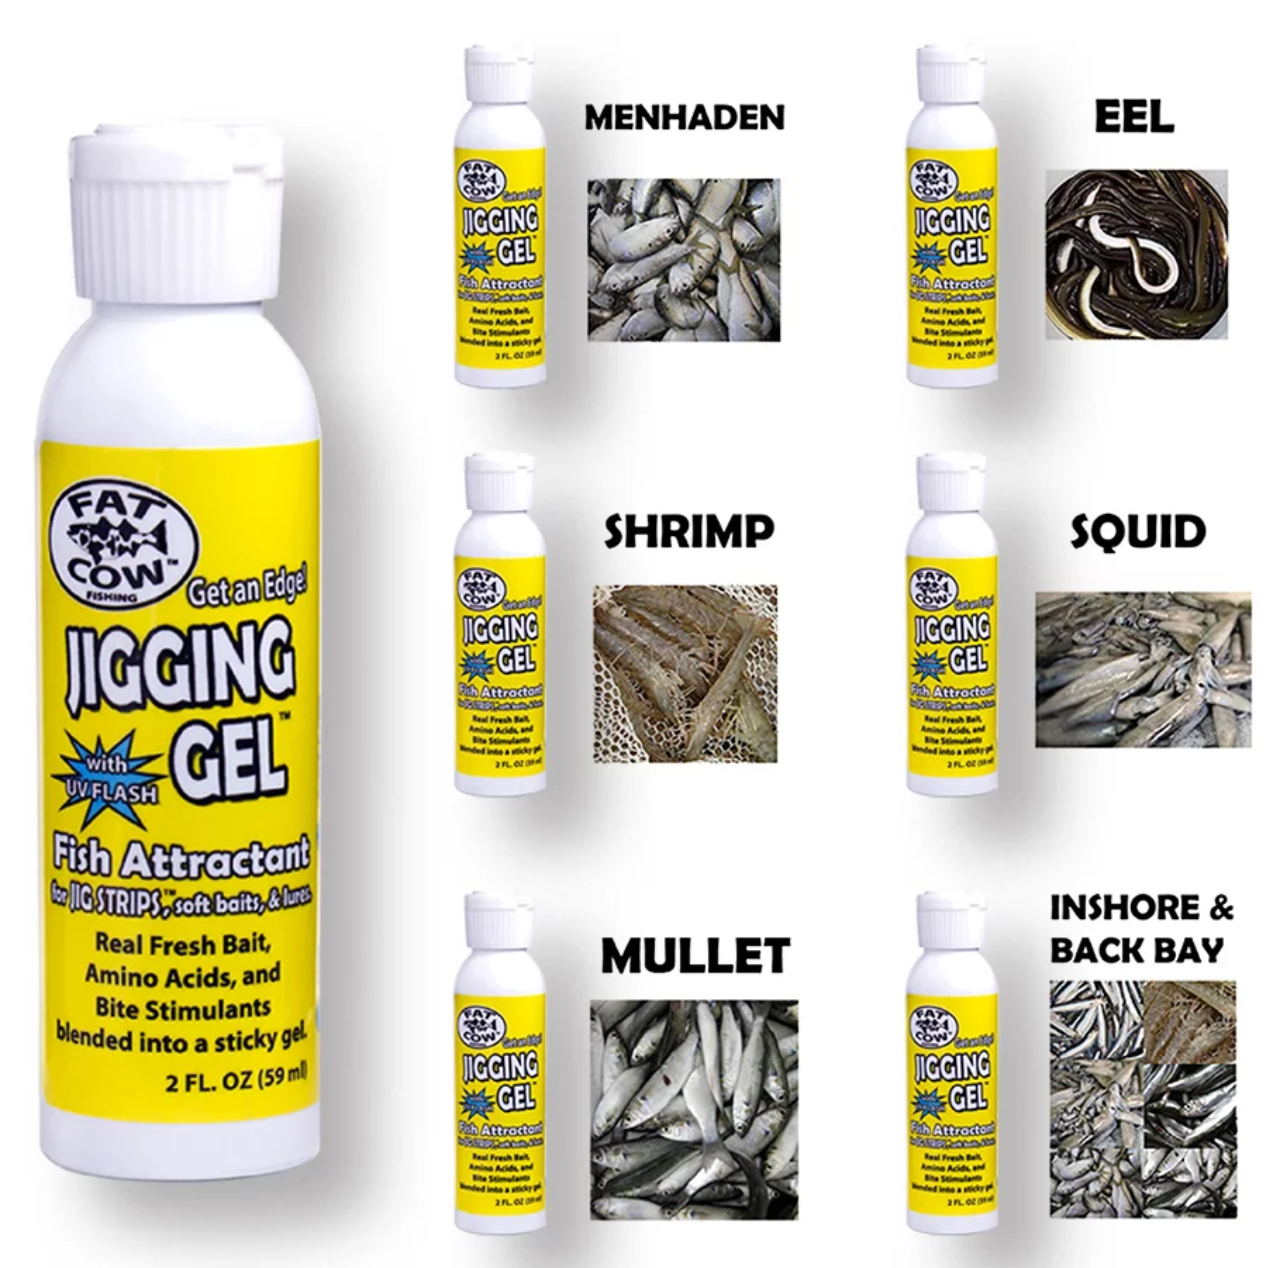 Fat Cow Fishing Jigging Gel Fish Attractant – White Water Outfitters